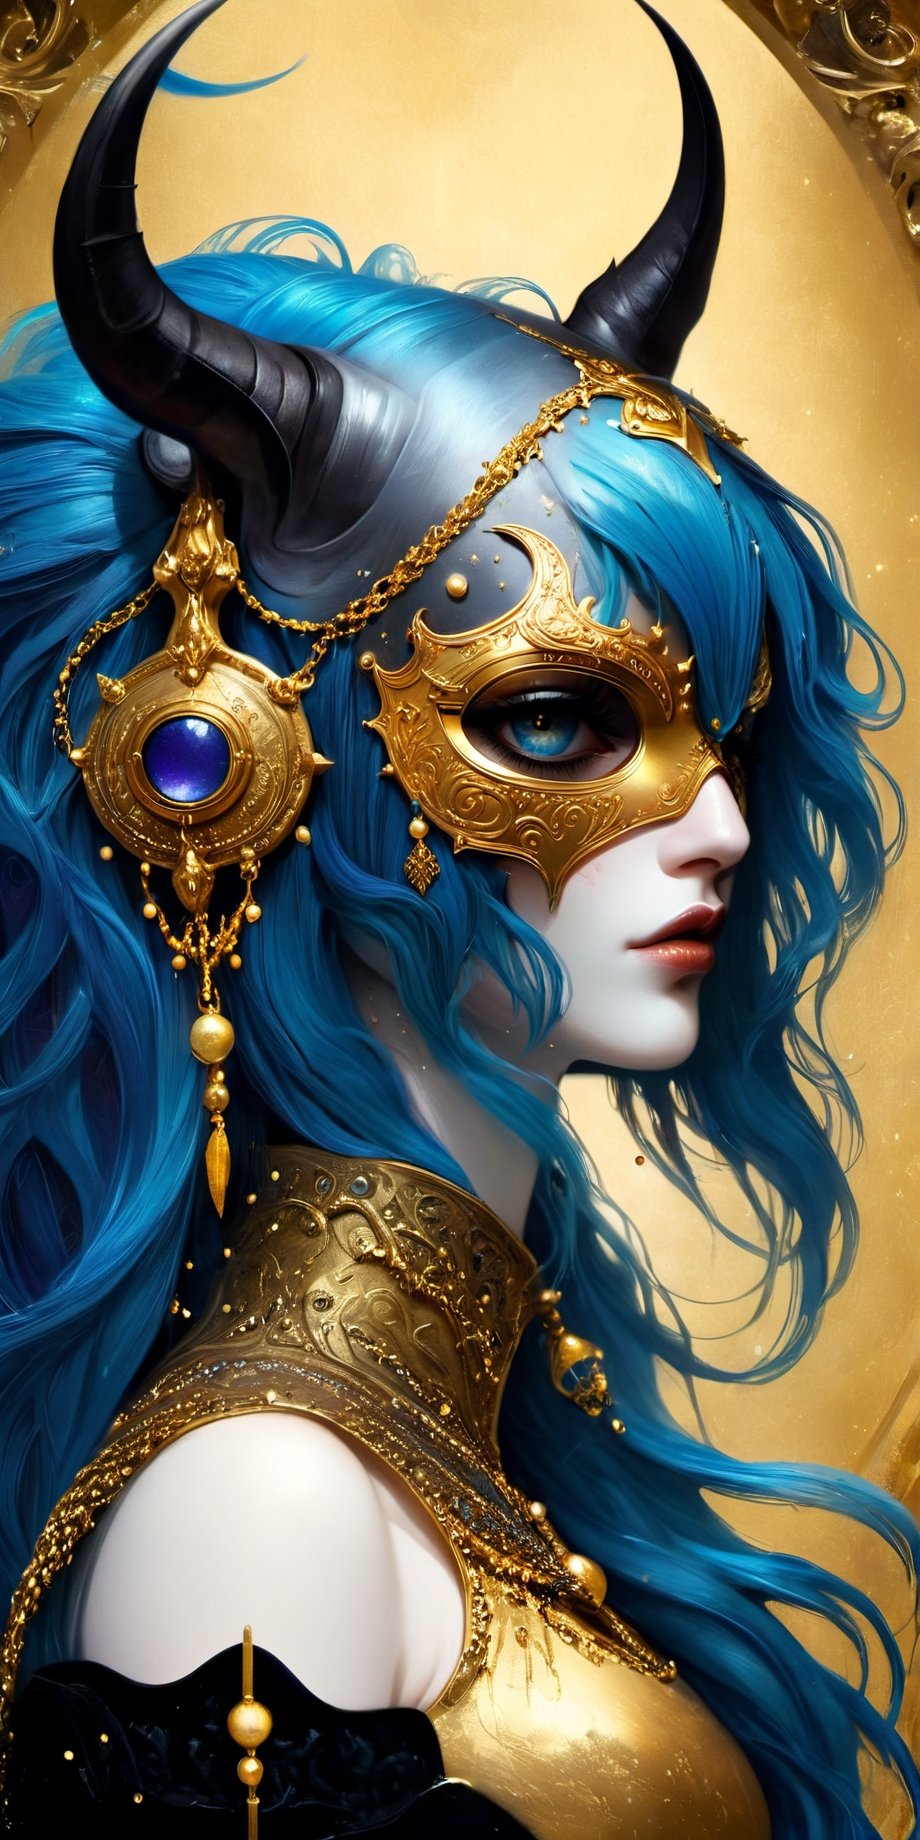 ((bejeweled full metal helmet covering eyes, covering head)). a warrior woman with blue hair wearing a gold warrior helm with an eyeless mask, covered eyes, profile view, inspired by Hedi Xandt, by gerald brom, todd lockwood and carne griffiths, rococo, hauntingly beautiful illustration, gothic fantasy, (copper goat skulls, photo of a hand jewellery model, intricate latex set, golden taurus, pearls and chains, singularity sculpted ー etsy, baphomet, inlaid with gold rococo:0.7), bokeh bioluminescent background, textured gold leaf and abstract lines in bg, ,portraitart,art_booster,Decora_SWstyle